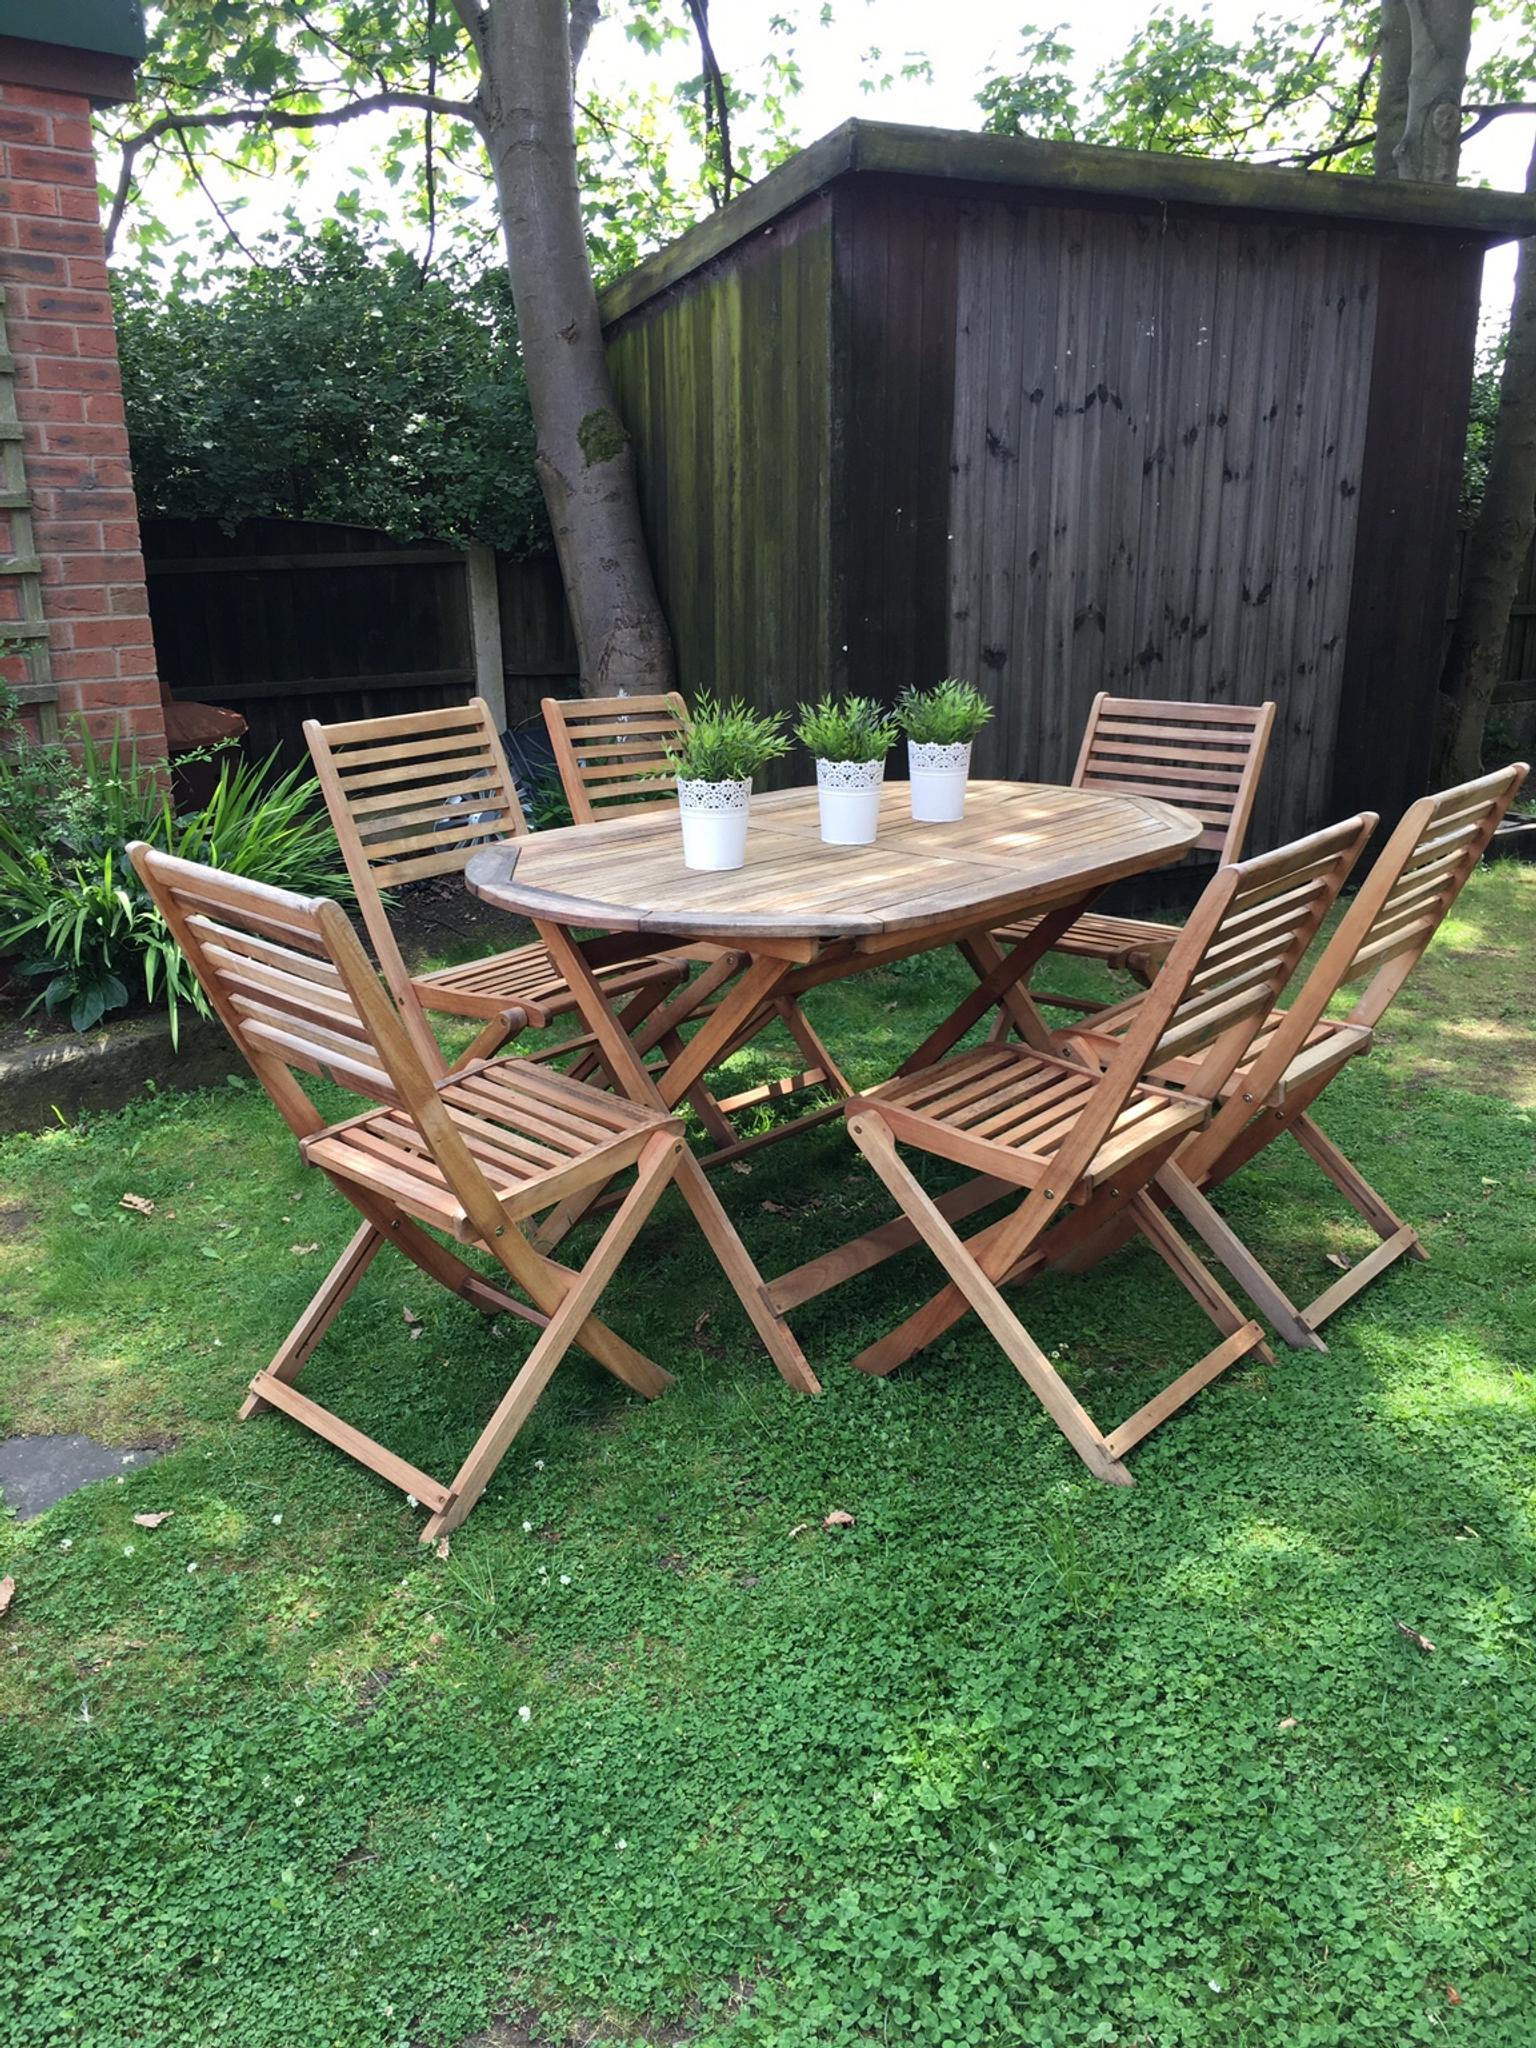 Garden Table And Chairs, Wooden Folding Table And Chairs For Garden